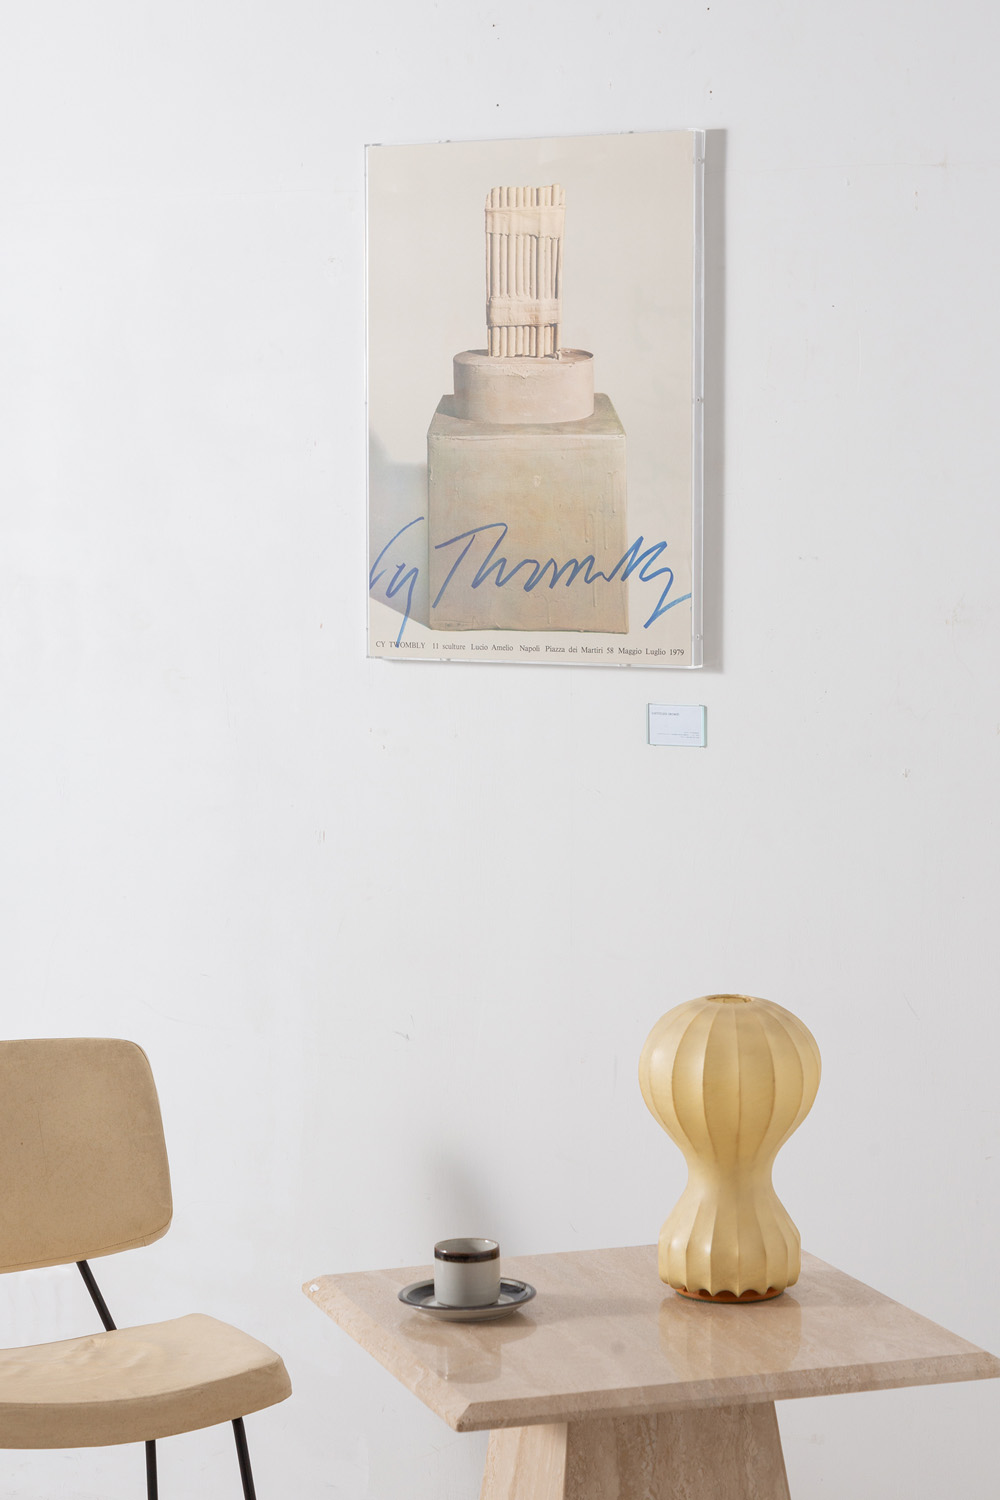 Focus on CY TWOMBLY｜VINTAGE POSTER